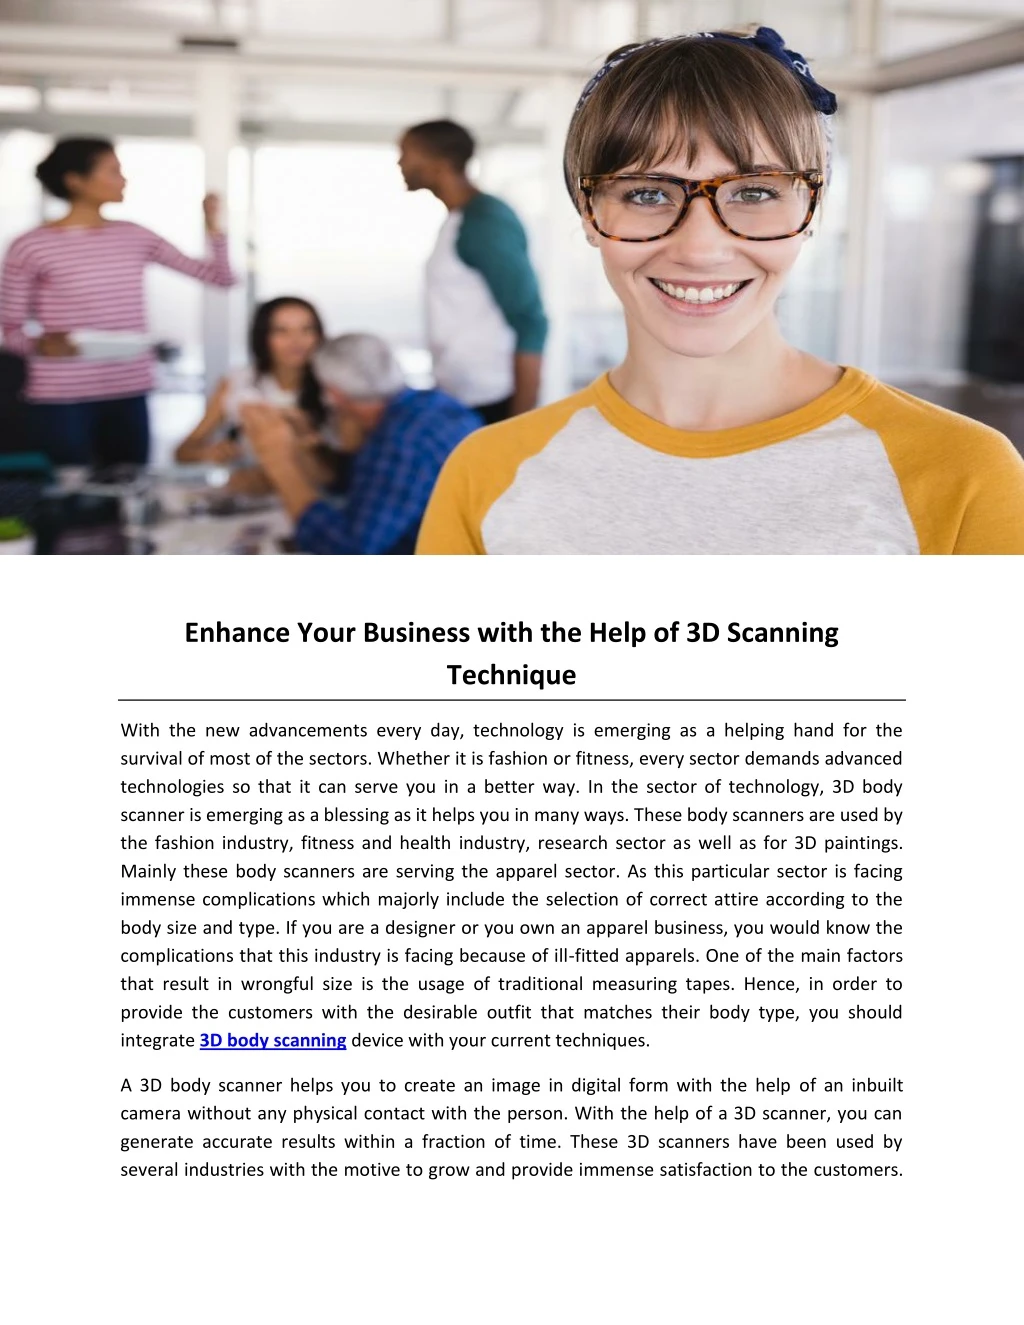 enhance your business with the help